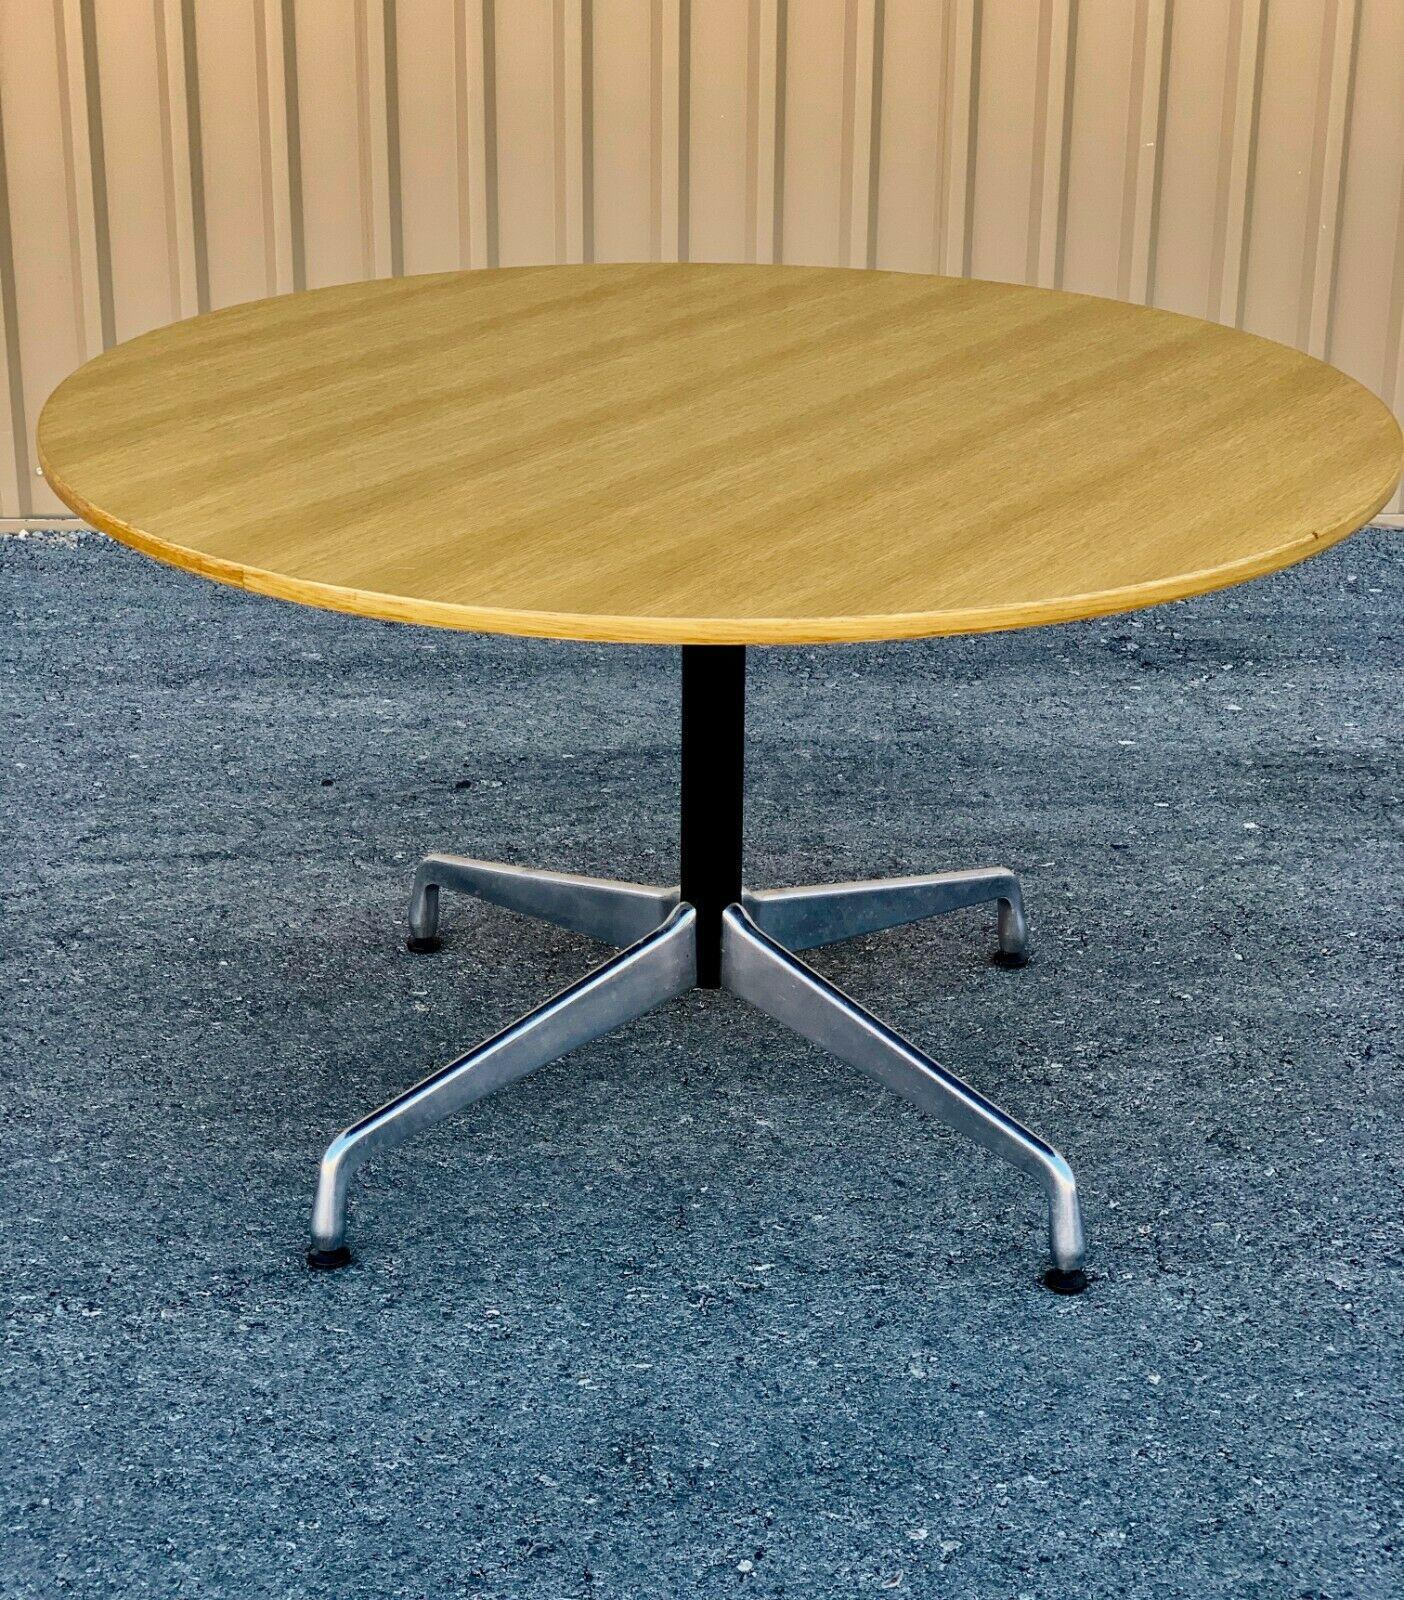 This beautiful and iconic Herman Miller table has an oak (oak is rare for this type table ) top and the traditional base with the black stem and Metal legs. Modern and sleek. Herman Miller segmented table is a durable solution for a wonderful